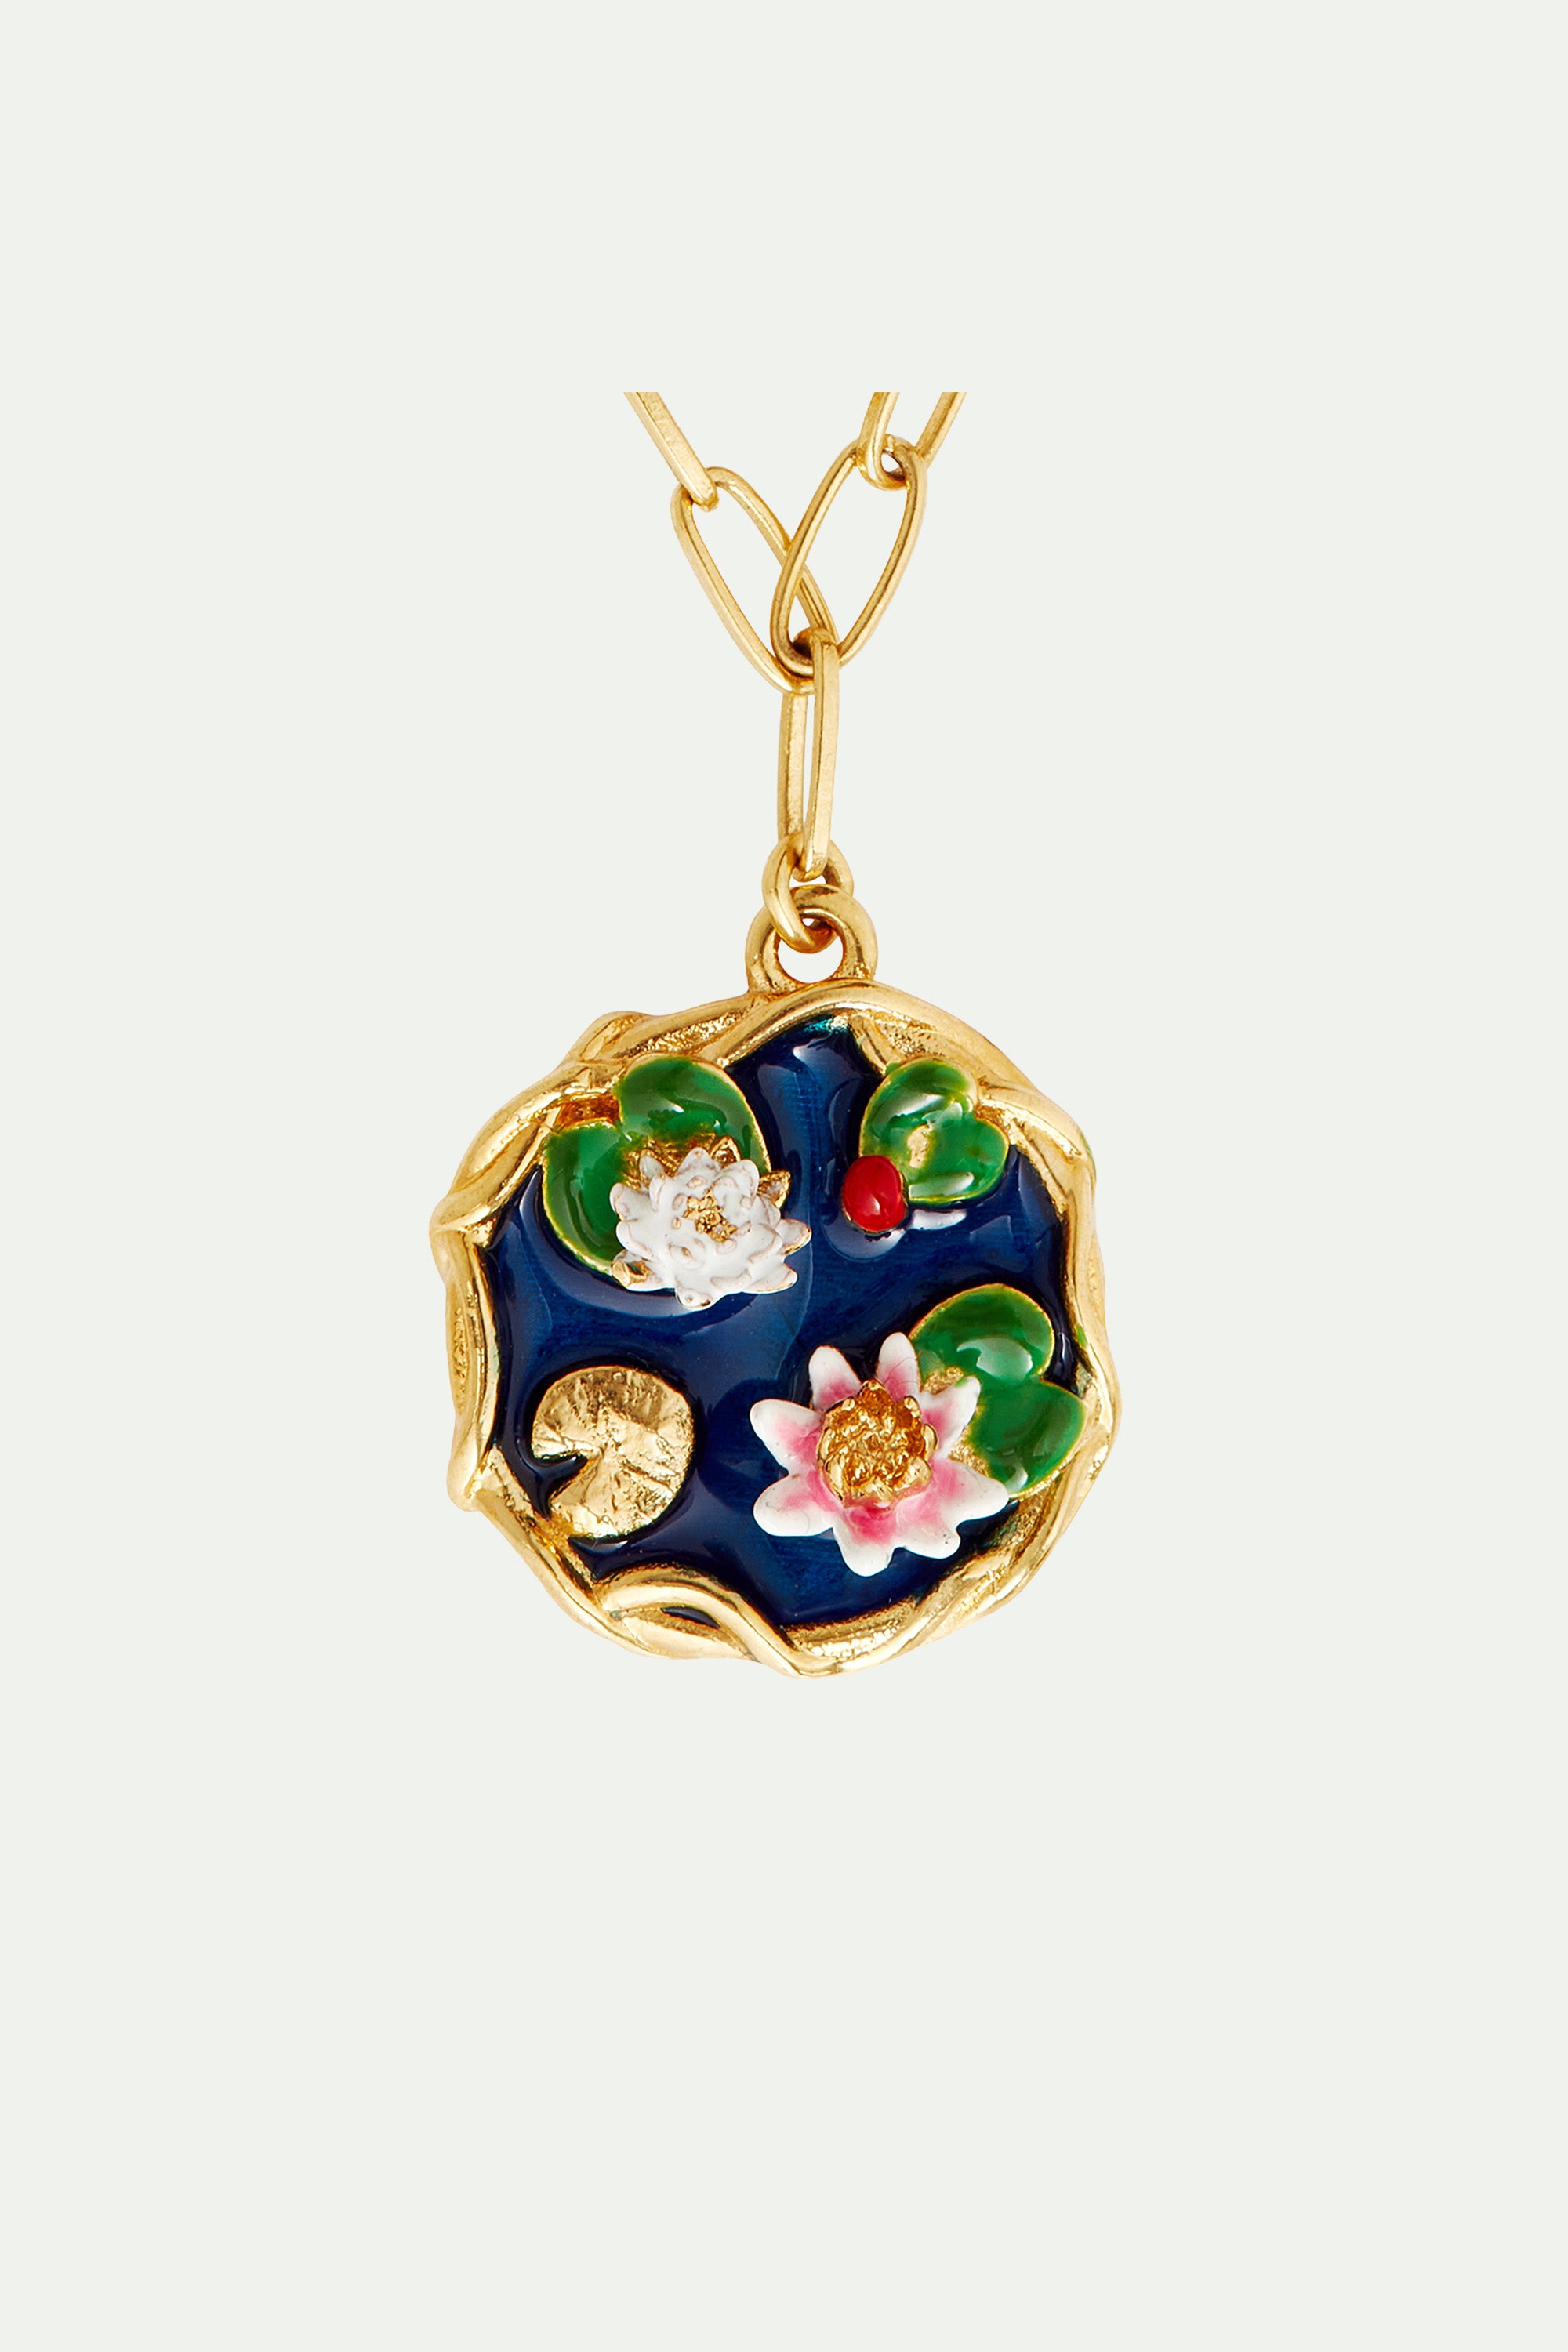 Giverny pond and lapis lazuli pendant necklace